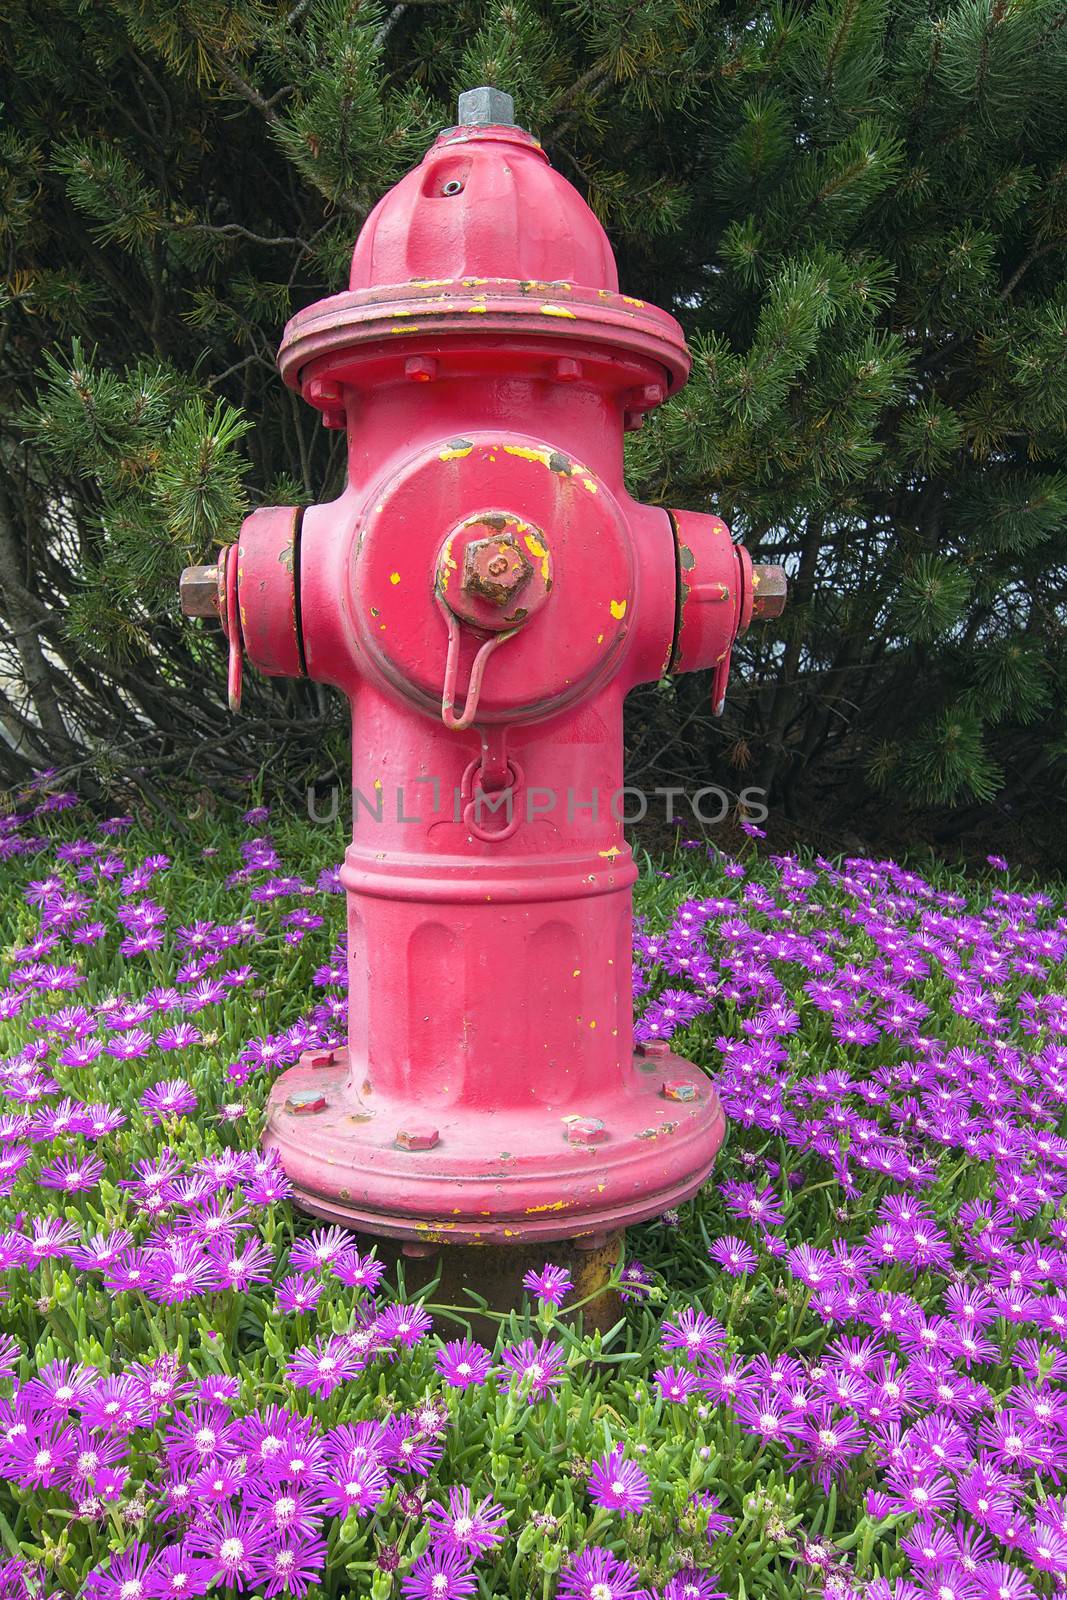 Red Fire hydrant on Bed of Creeping Ice Succulent Plant with Pink Flowers